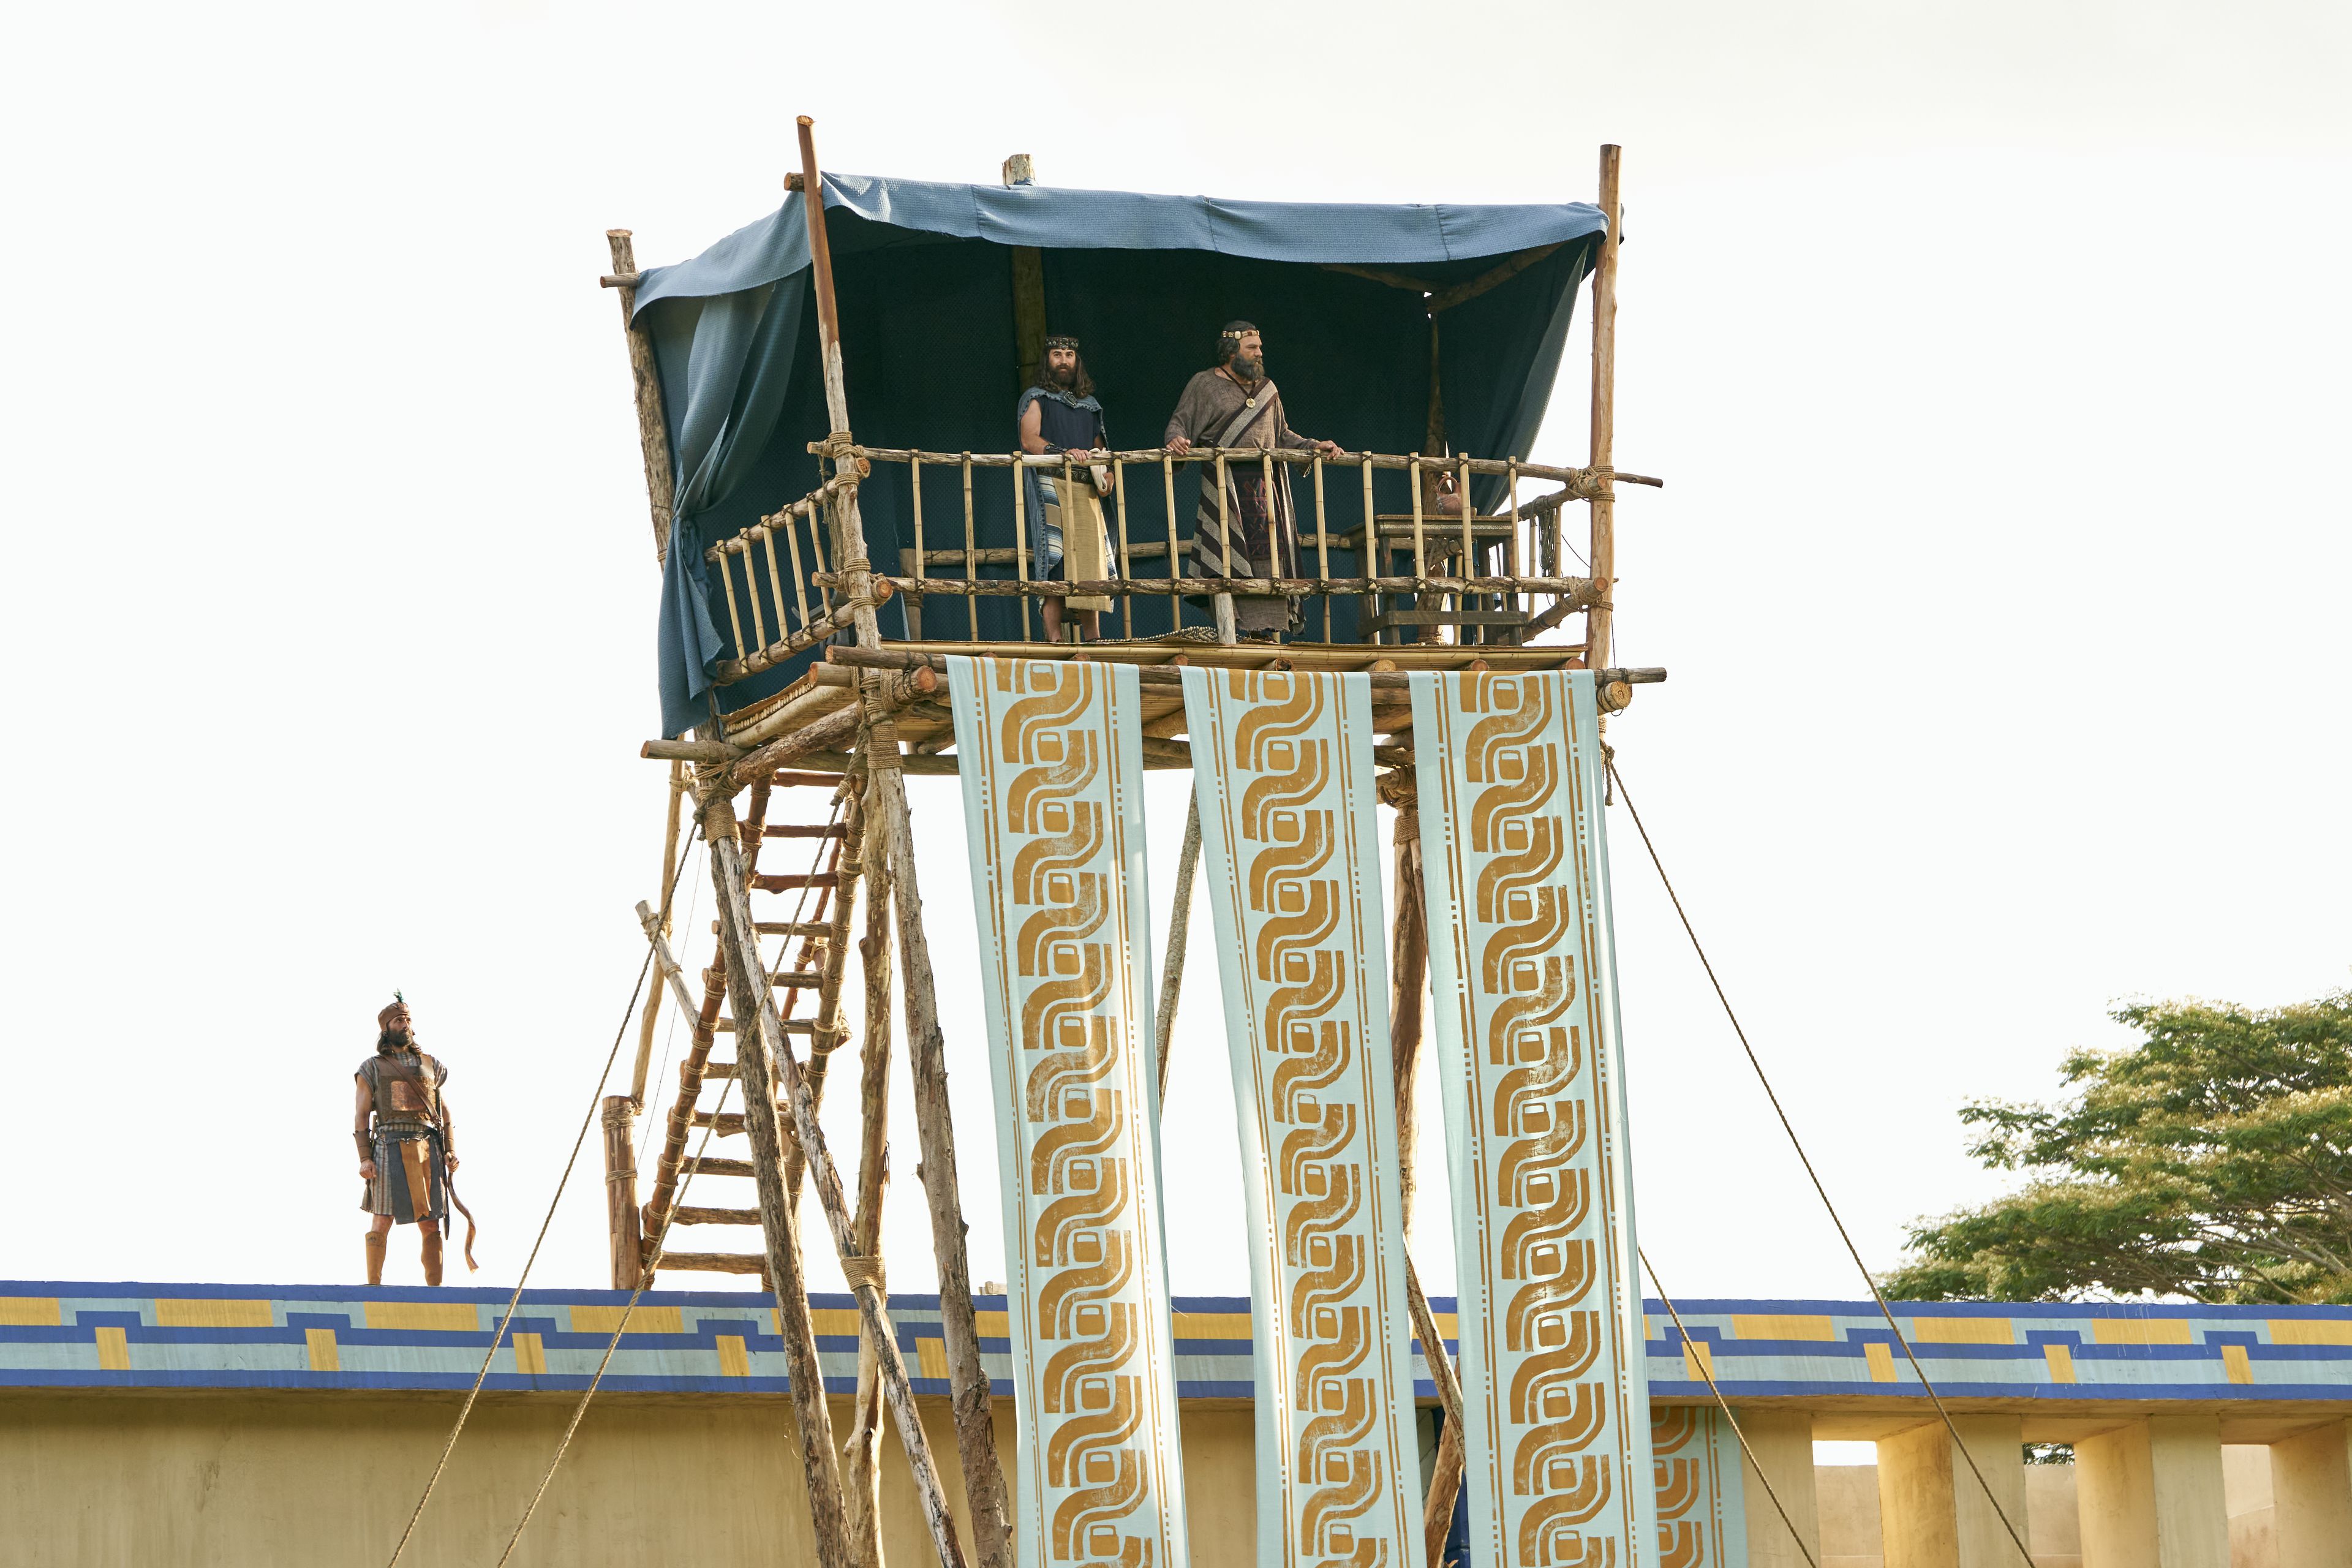 King Benjamin and Mosiah stand together on a tower. King Benjamin speaks to his people in the Land of Zarahemla.